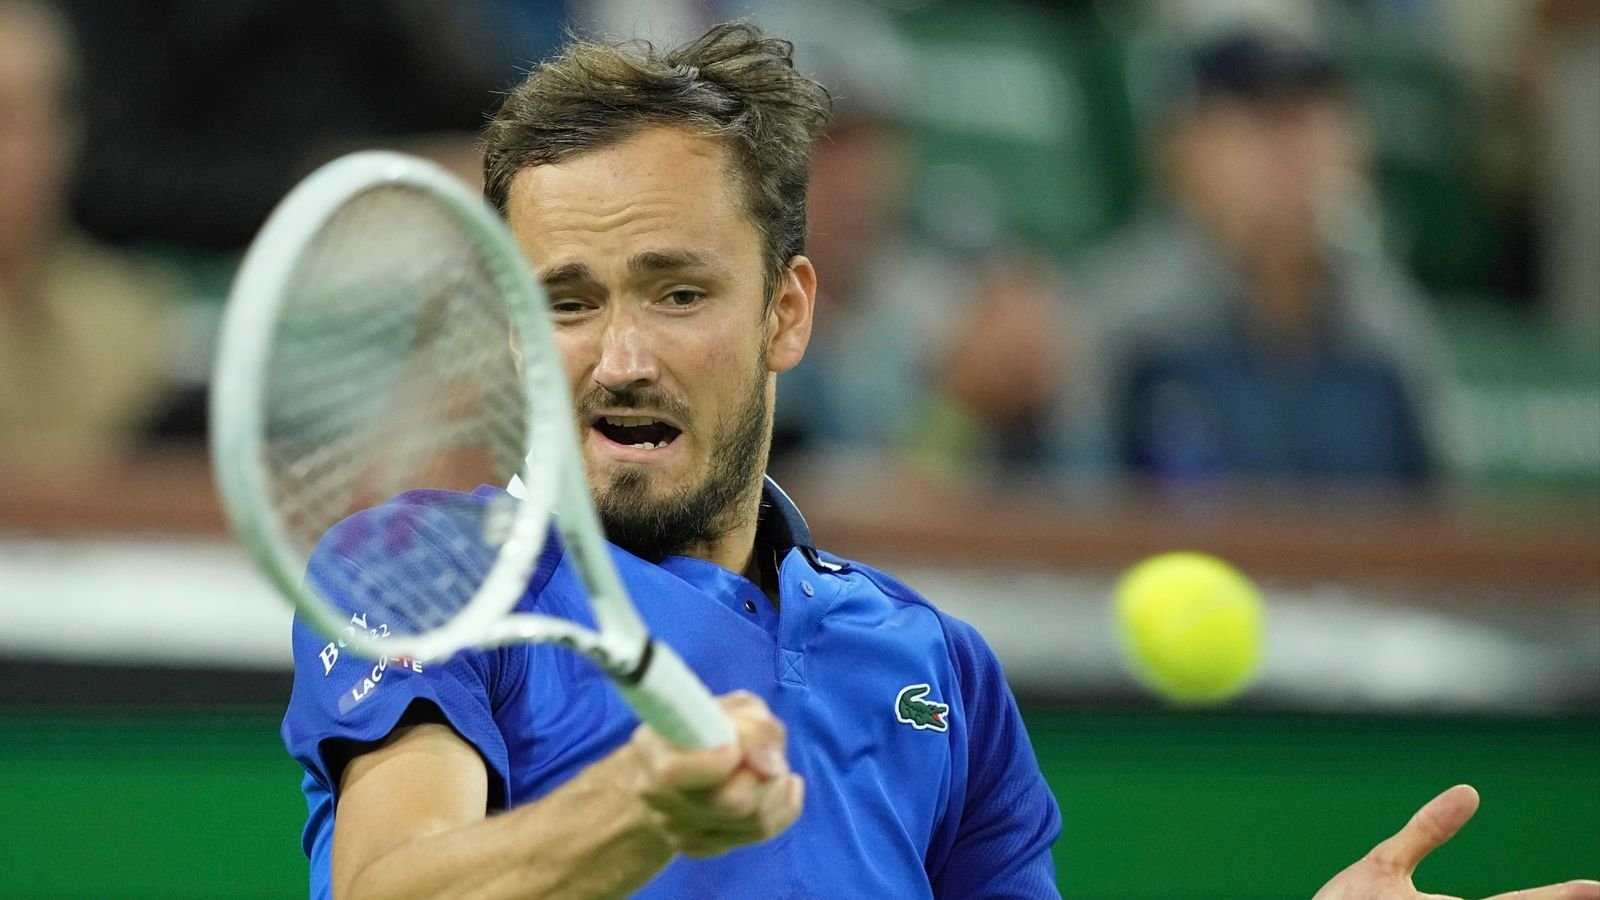 Indian Wells: Daniil Medvedev storms past Grigor Dimitrov as Casper Ruud and Tommy Paul also win | Tennis News